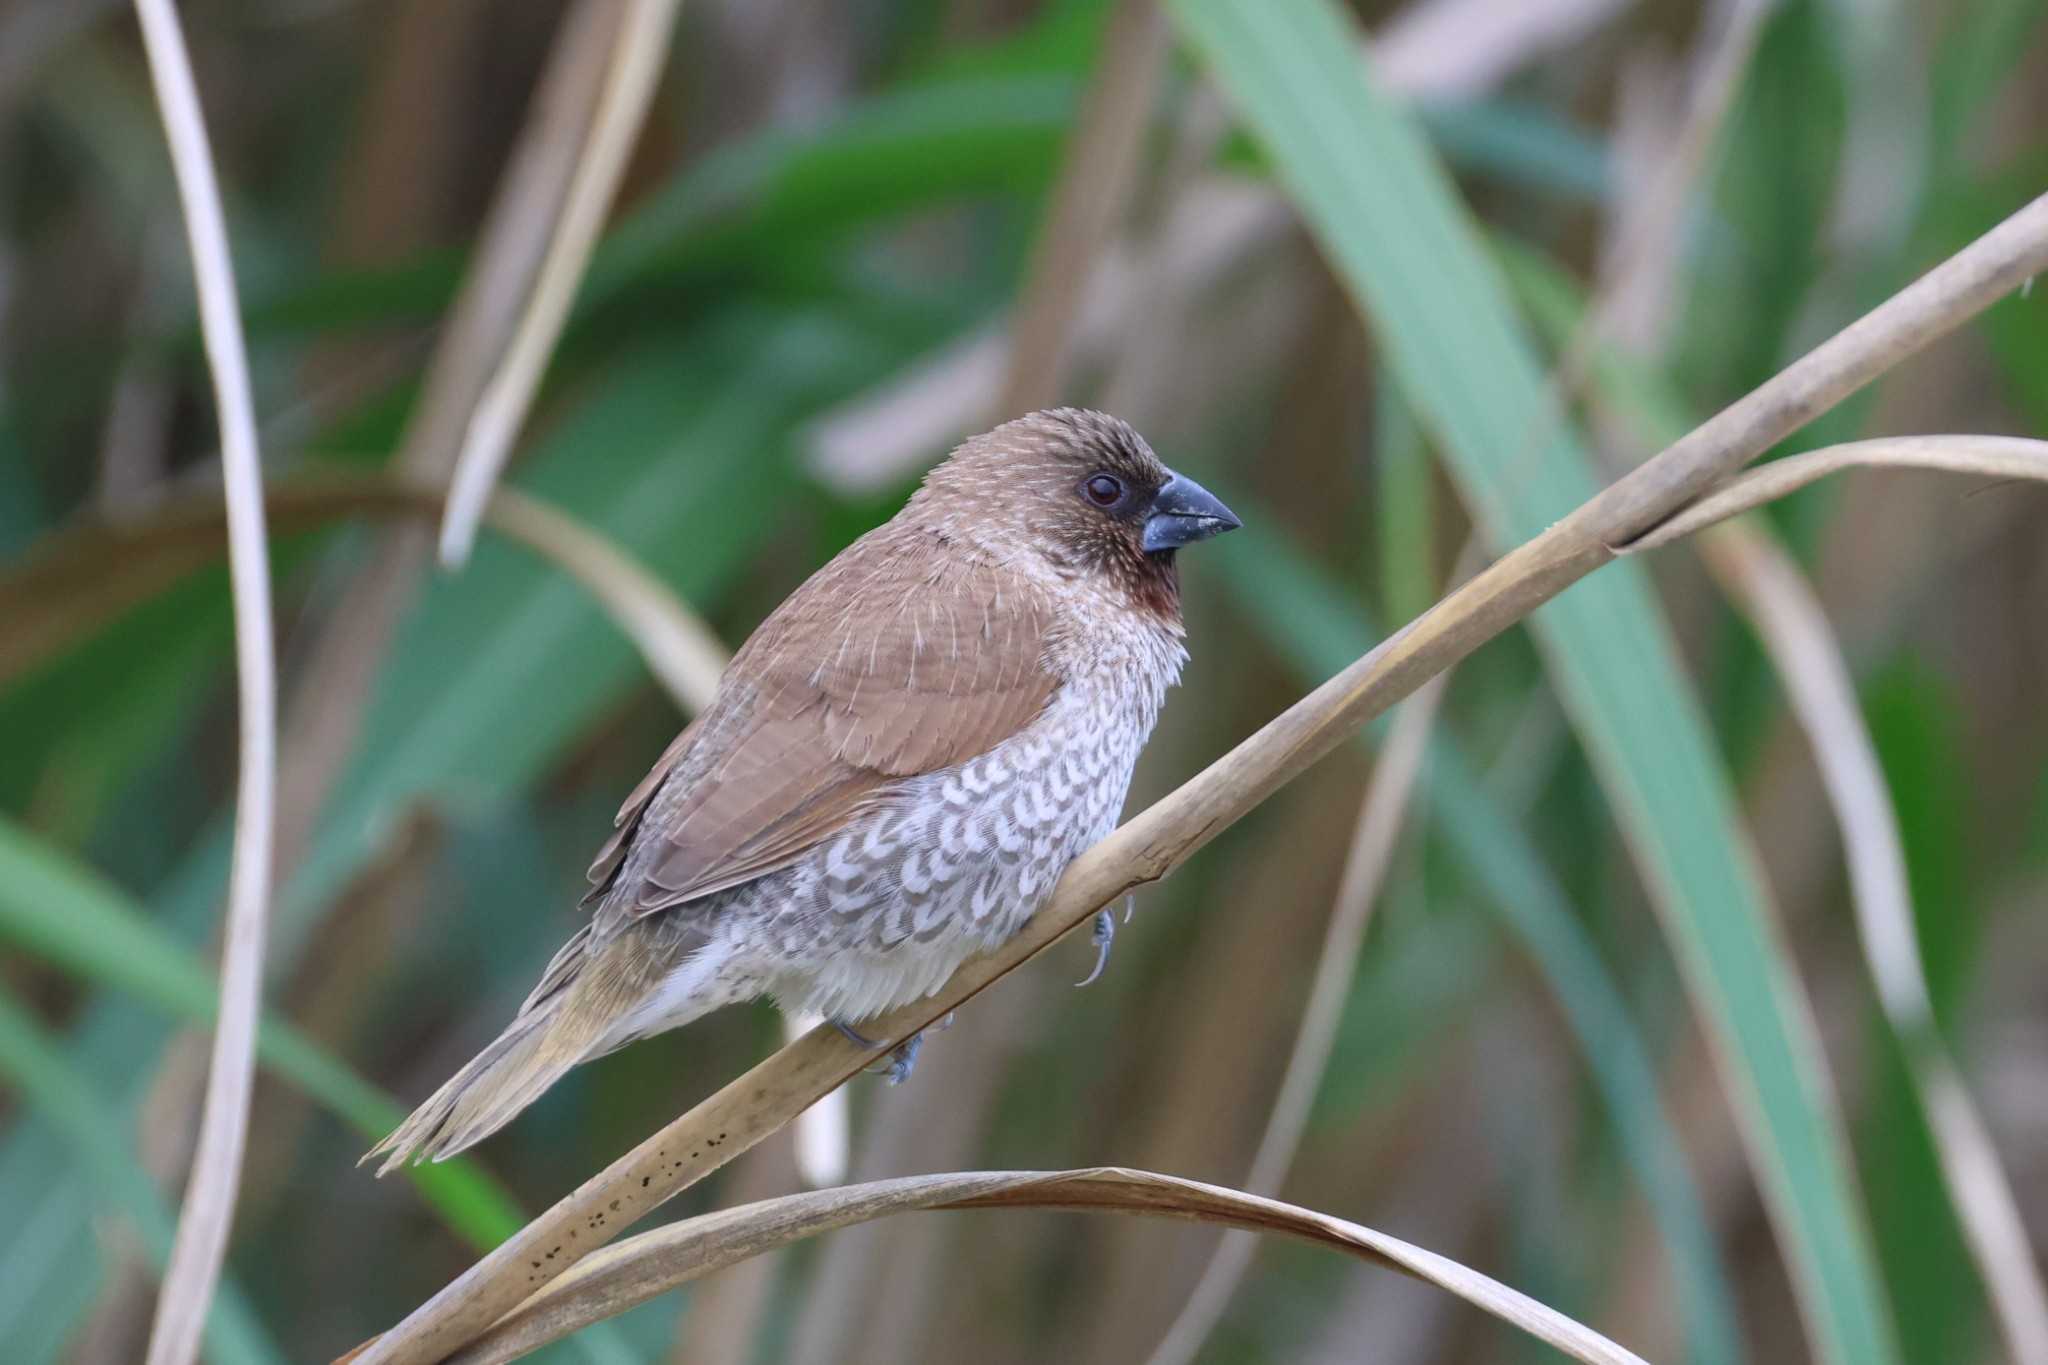 Photo of Scaly-breasted Munia at 大山田イモ畑 by ぼぼぼ